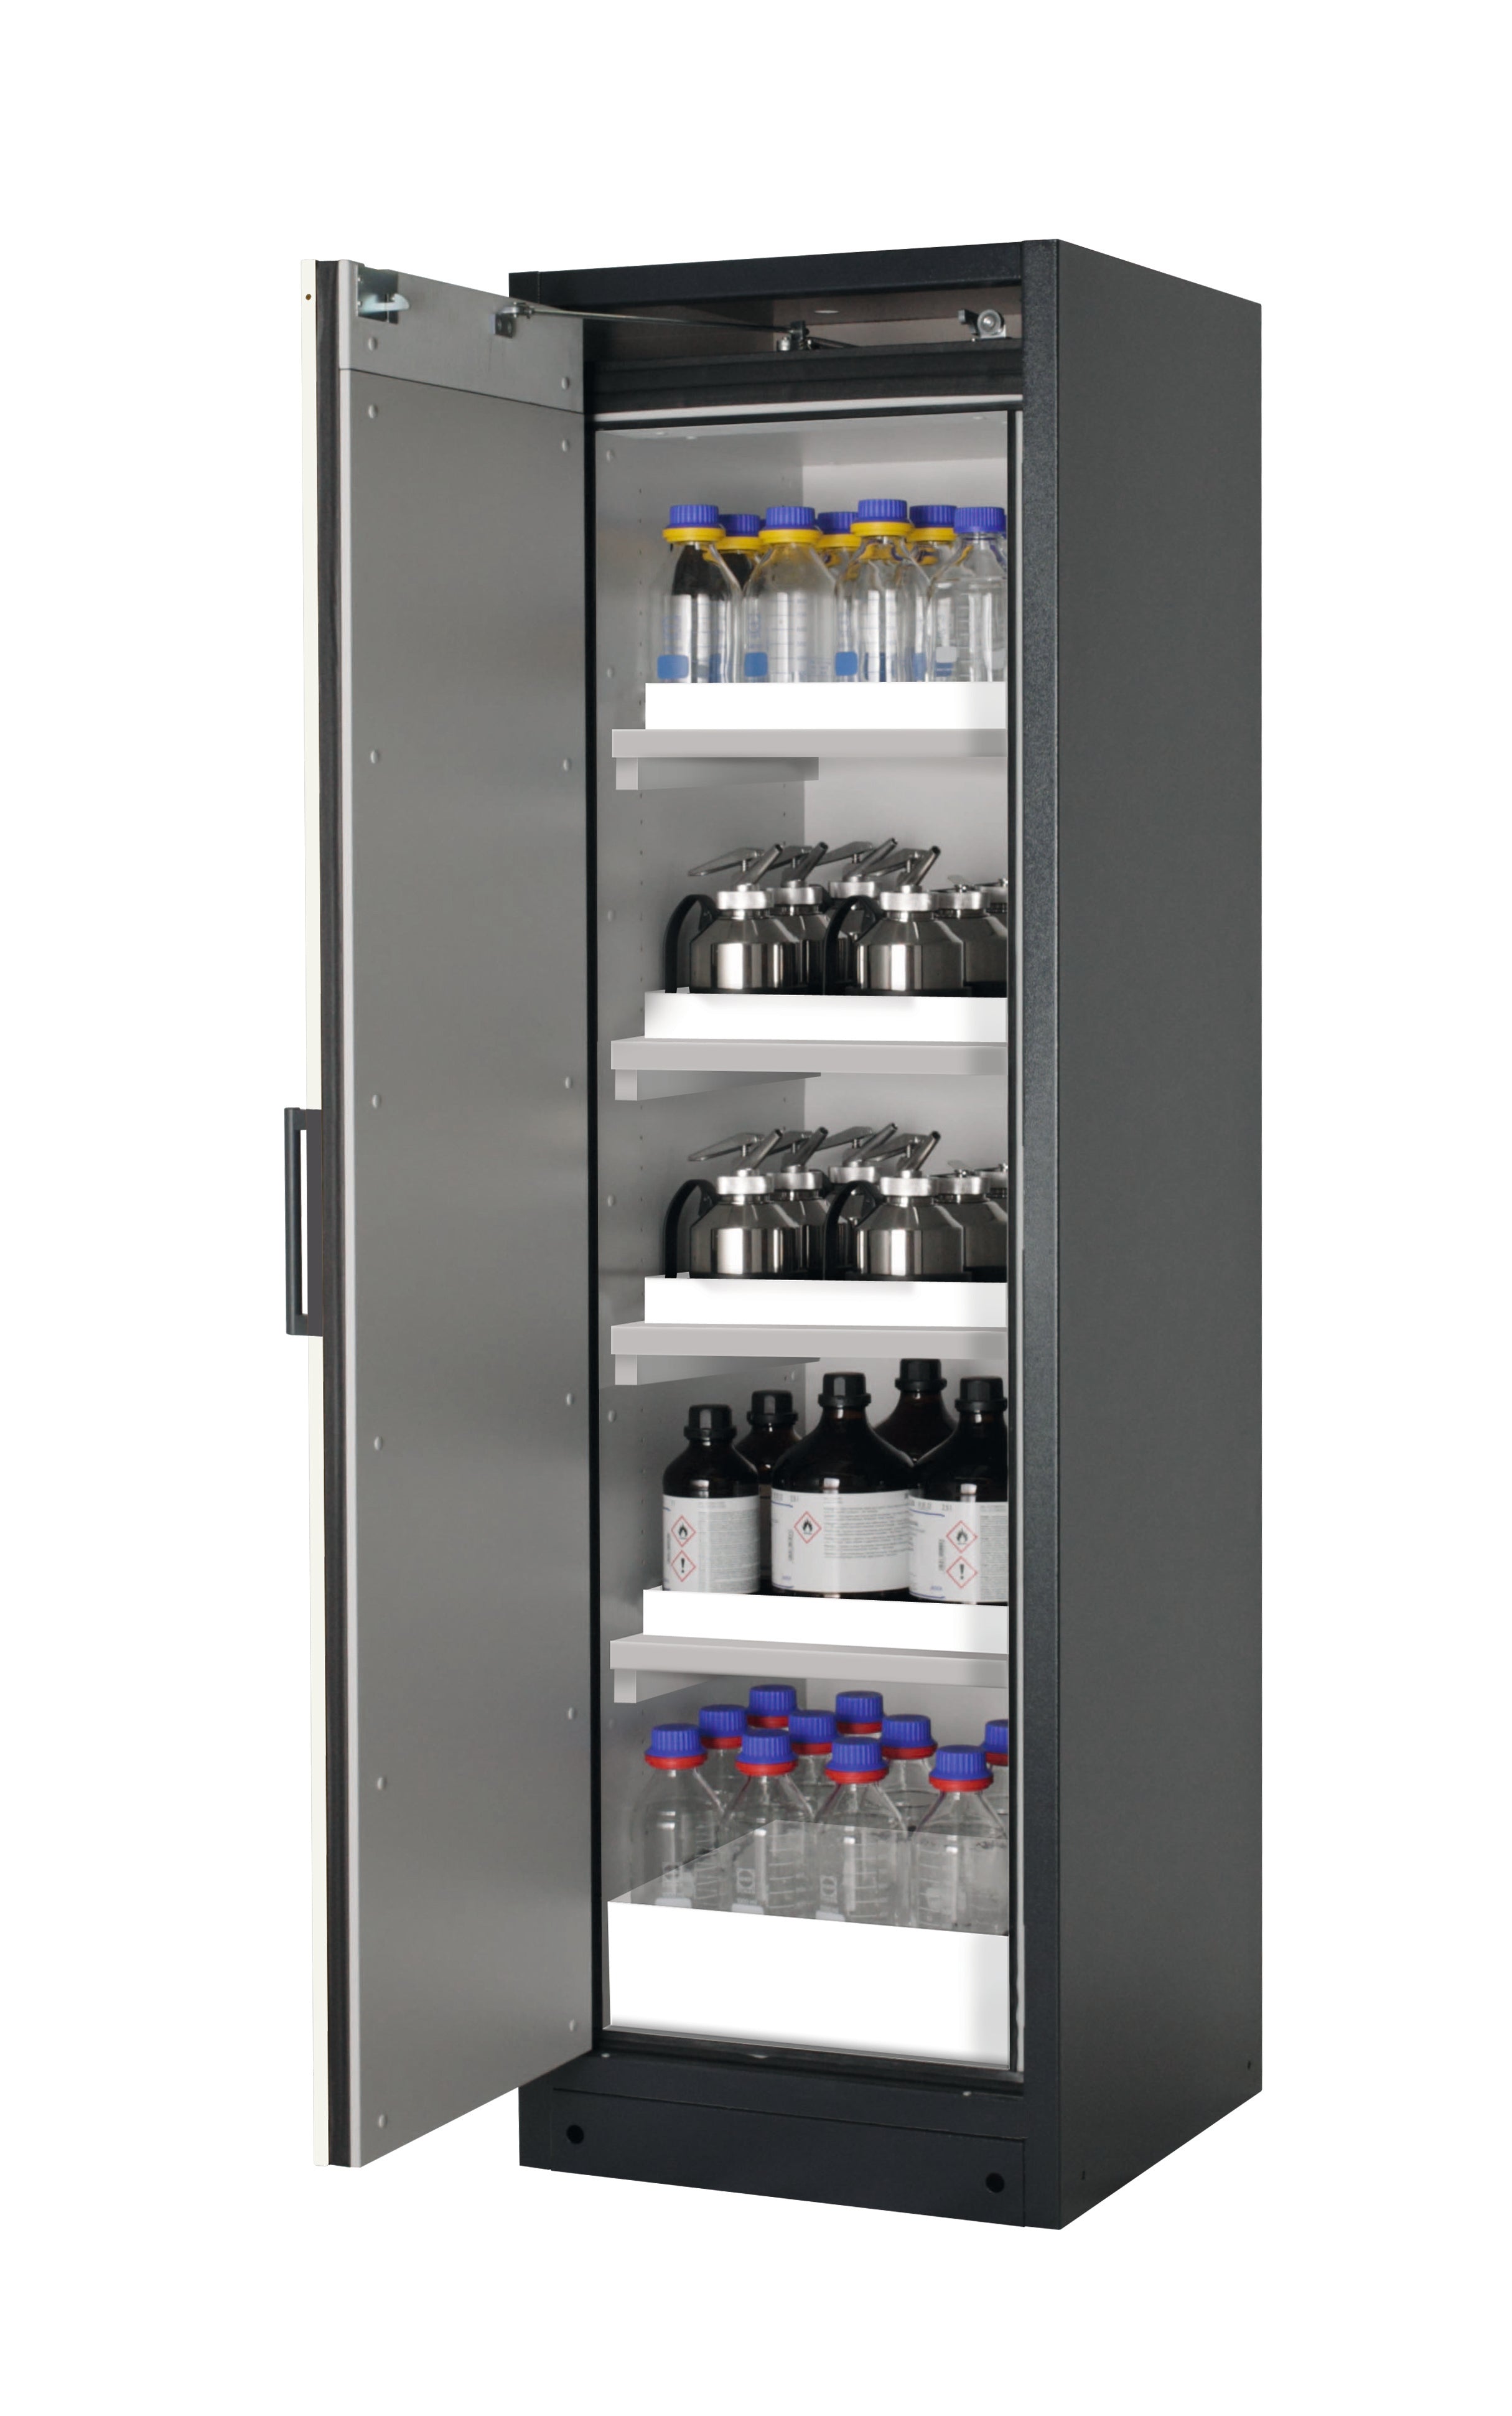 Type 90 safety storage cabinet Q-CLASSIC-90 model Q90.195.060 in asecos silver with 4x tray shelf (standard) (polypropylene),